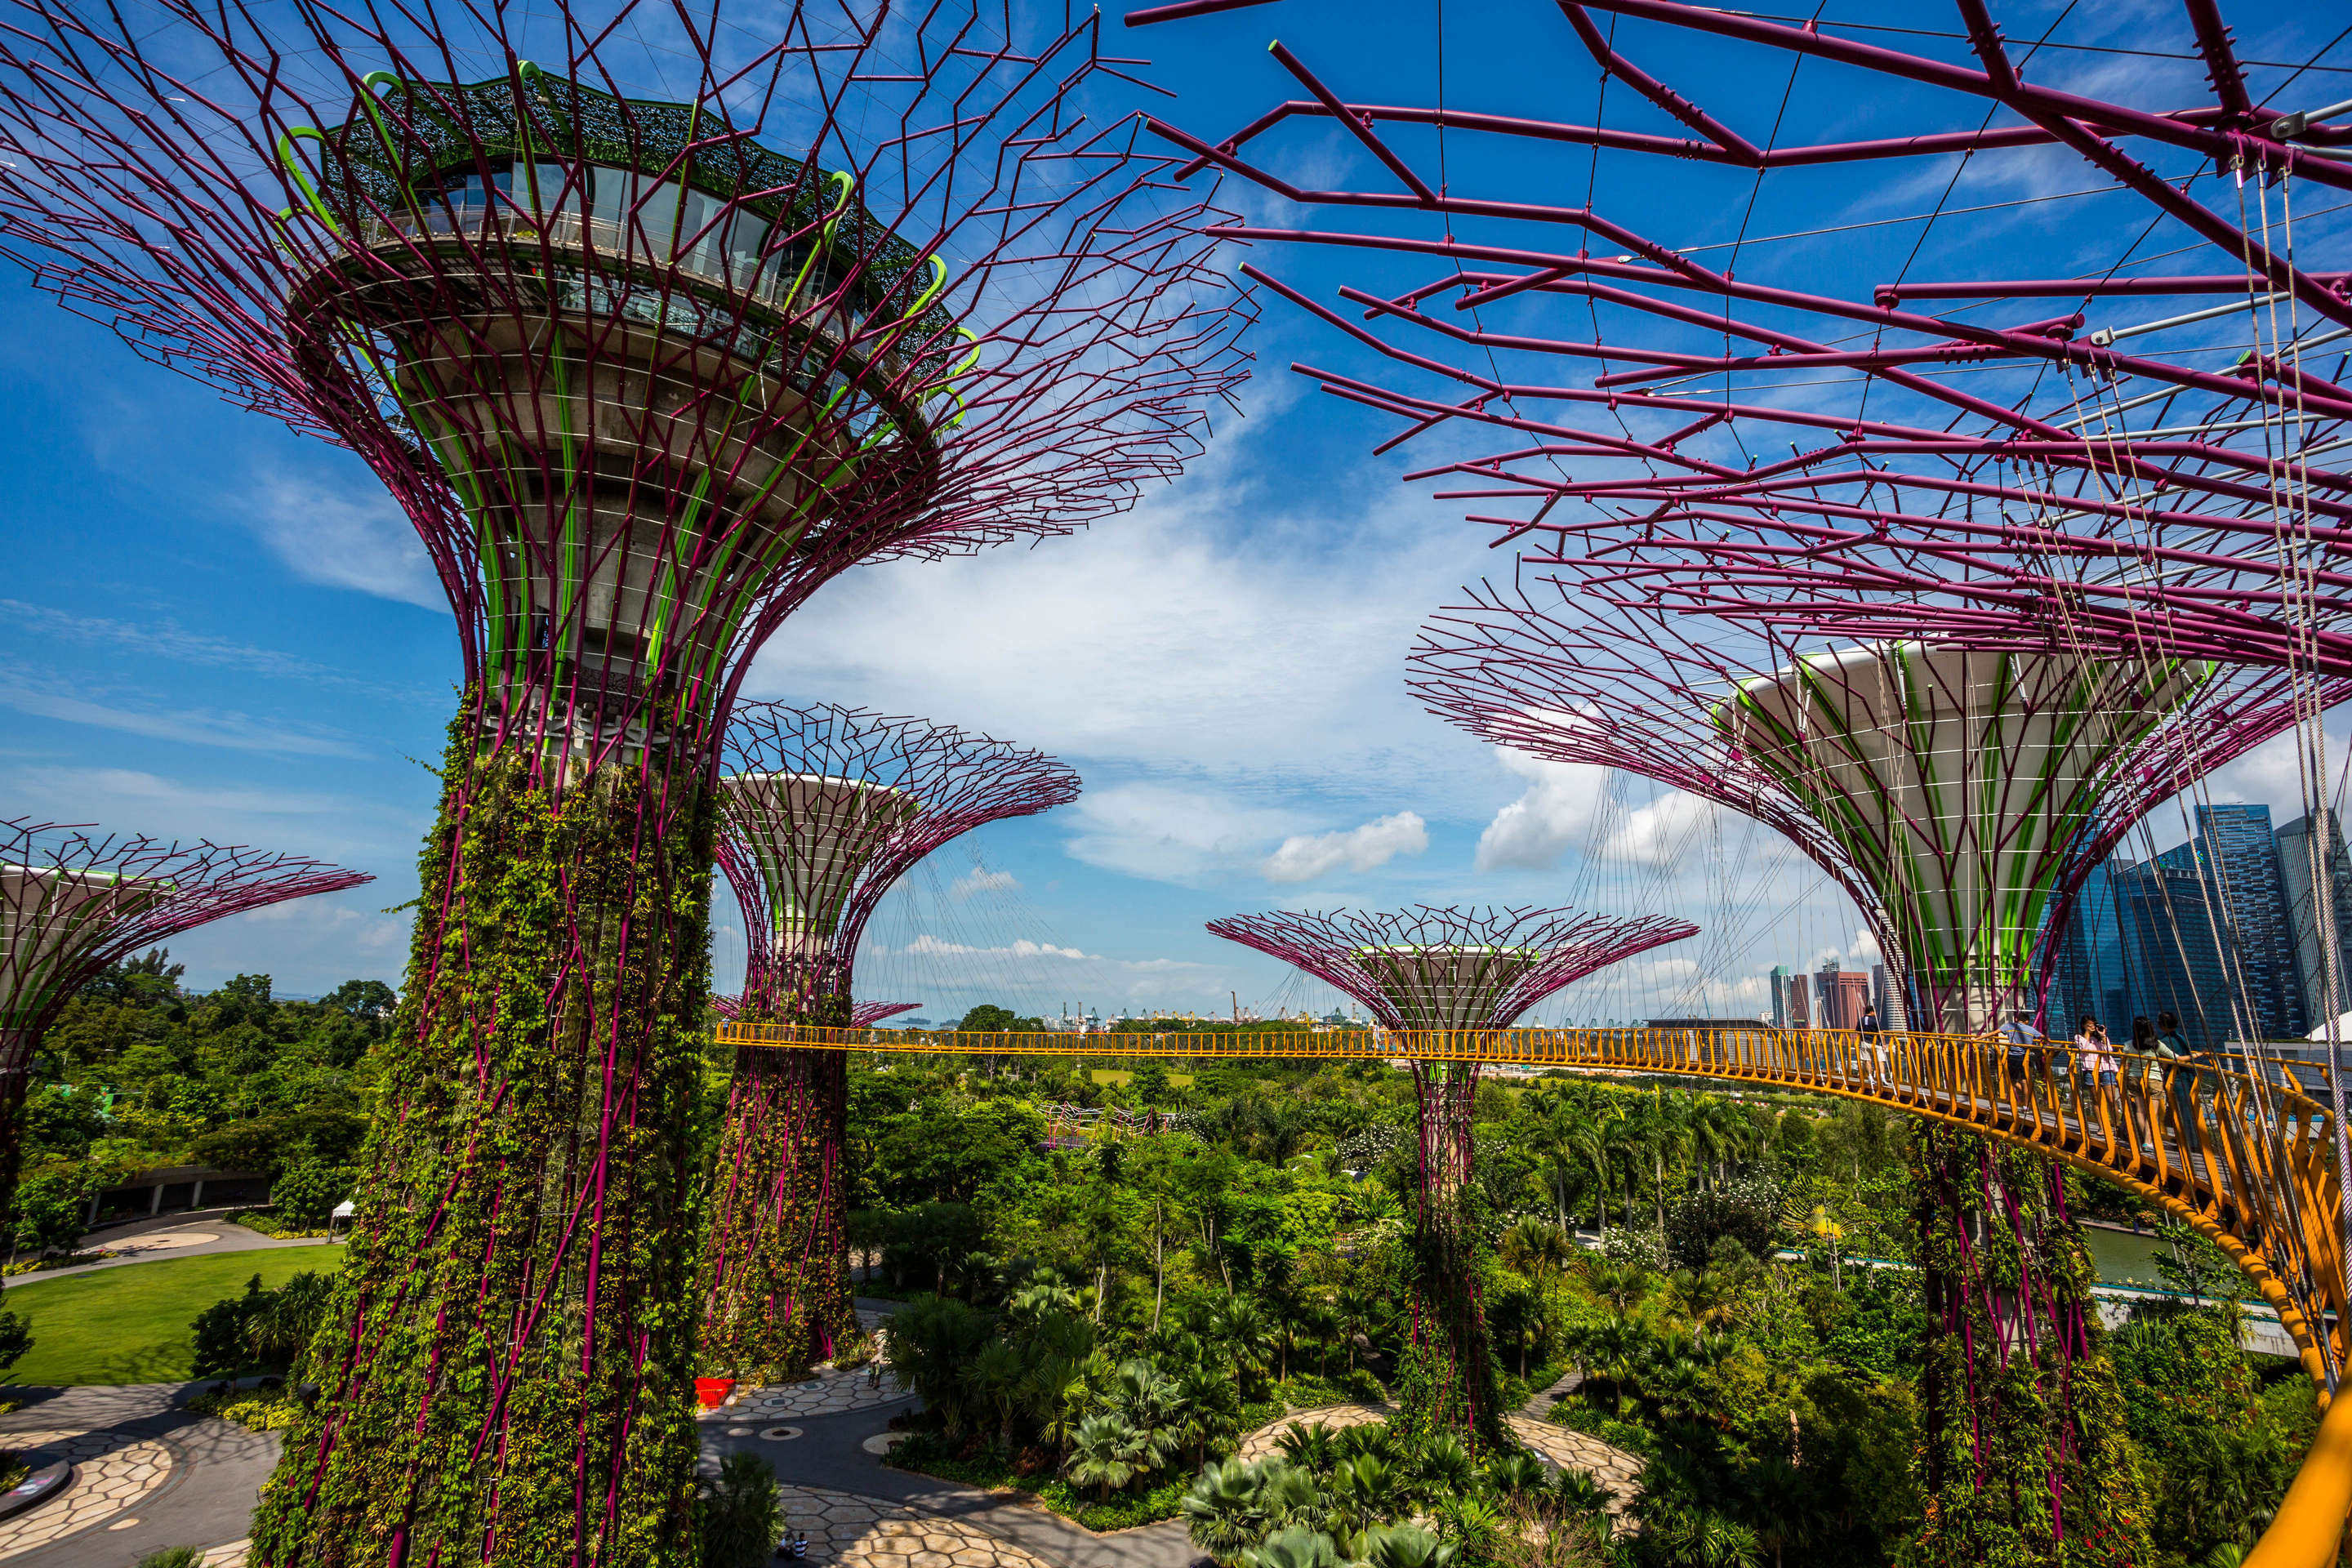 Gardens By the Bay’s Supertree grove in Singapore. The man and girl also talked about meeting up at Gardens by the Bay to “have fun” and discussed if they should record themselves having sex. Photo: Shutterstock